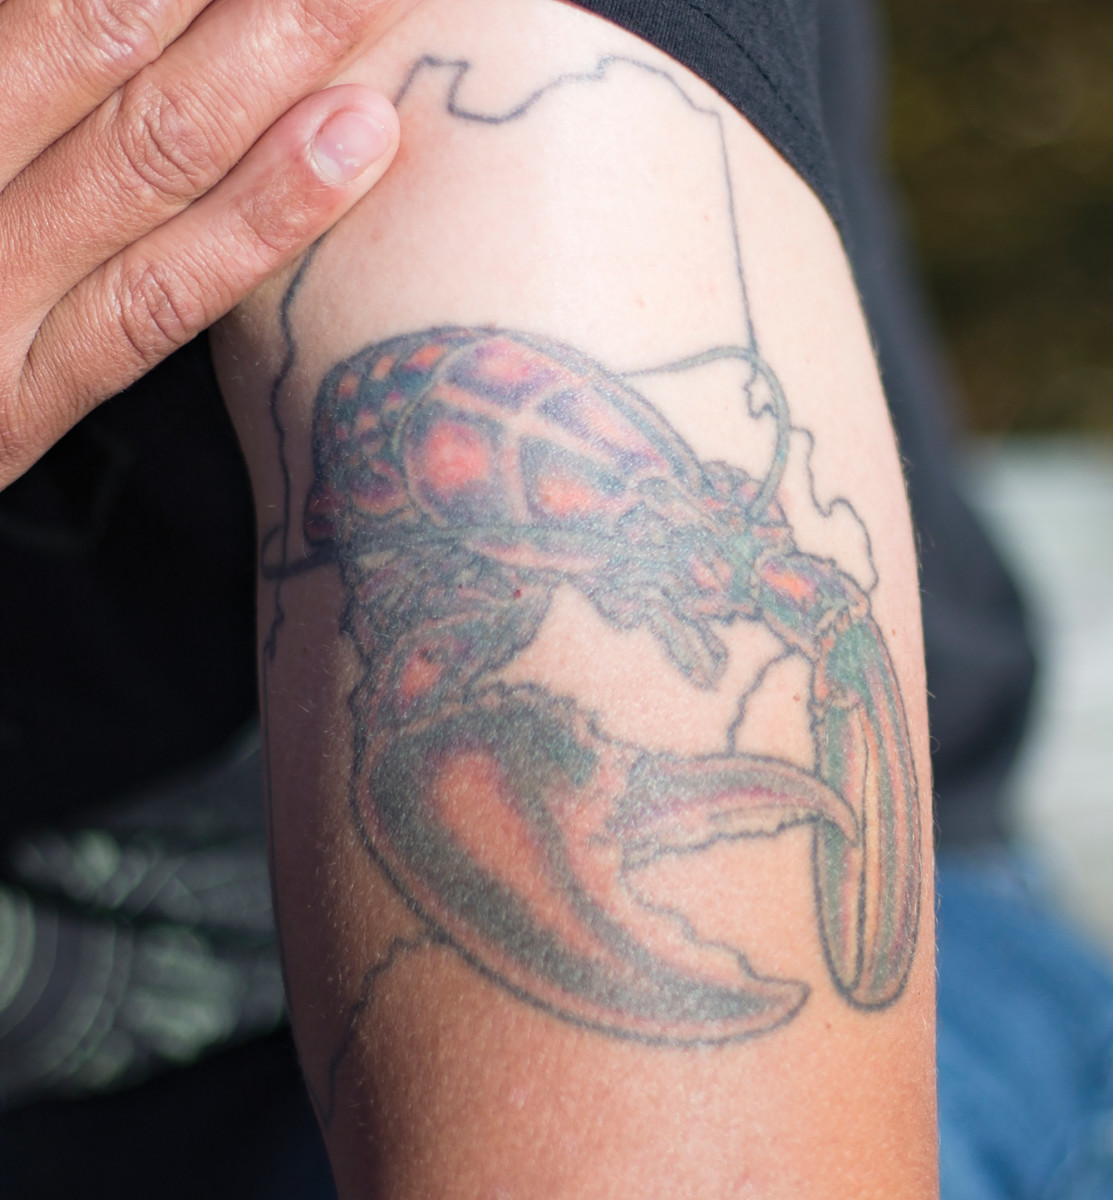 Lobsters aren’t just foodstuff in Maine, they’re basically a religion.